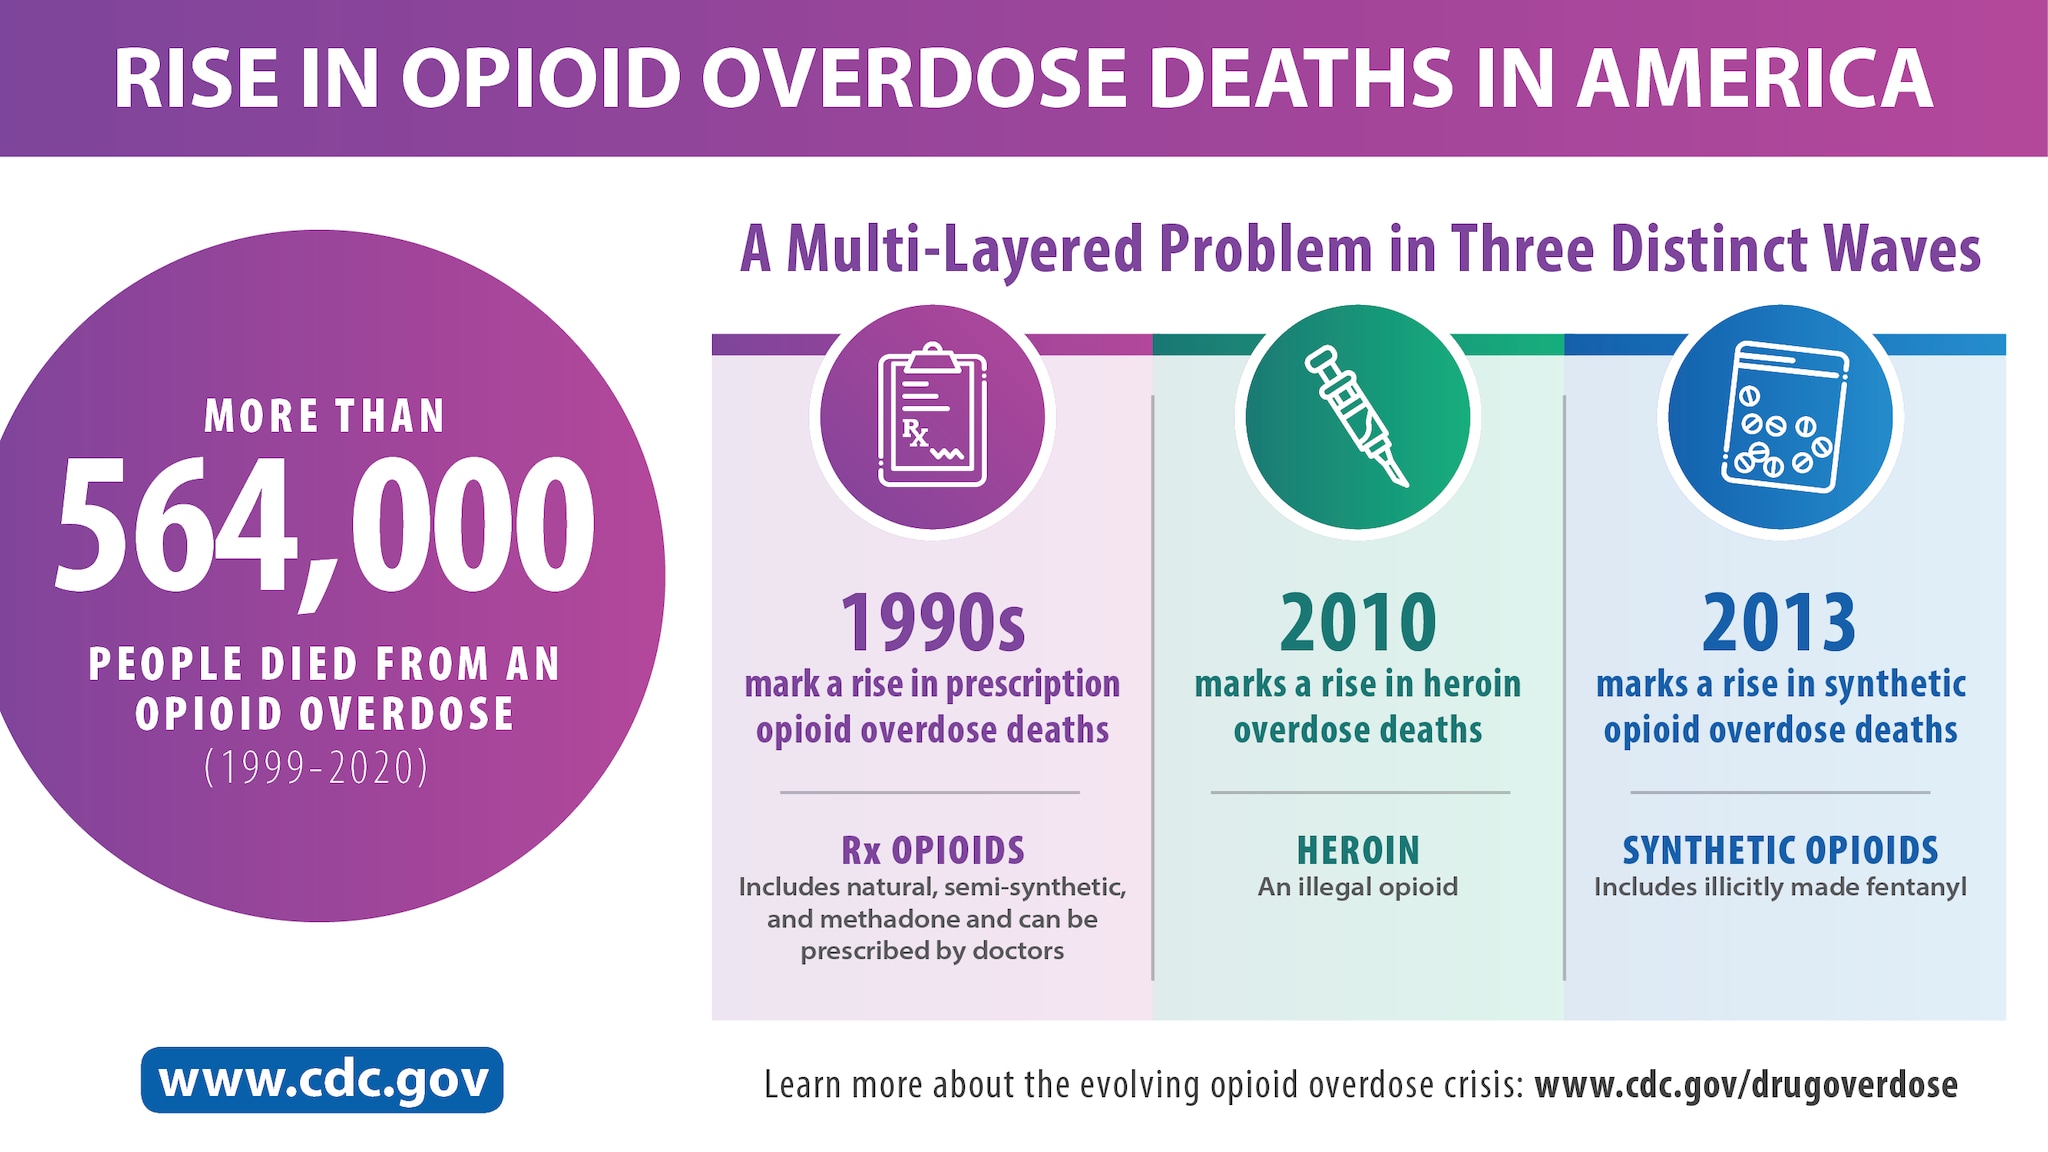 RISE IN OPIOID OVERDOSE DEATHS IN AMERICA:  A Multi-Layered Problem in Three Distinct Waves MORE THAN 564,000 PEOPLE DIED FR